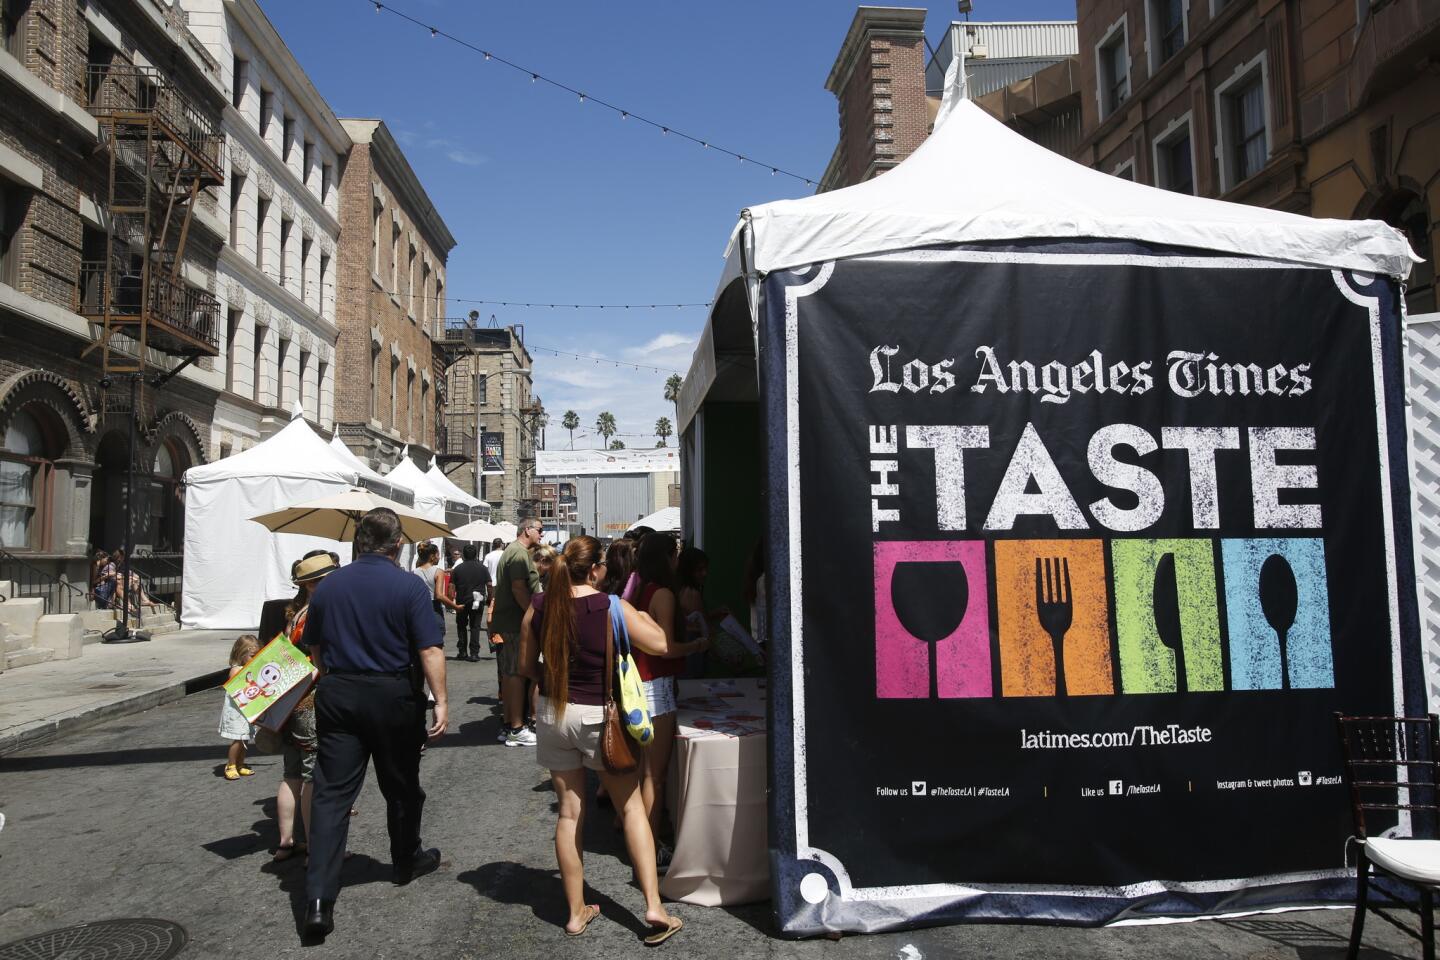 Event - Opening Night  THE TASTE - Los Angeles Times